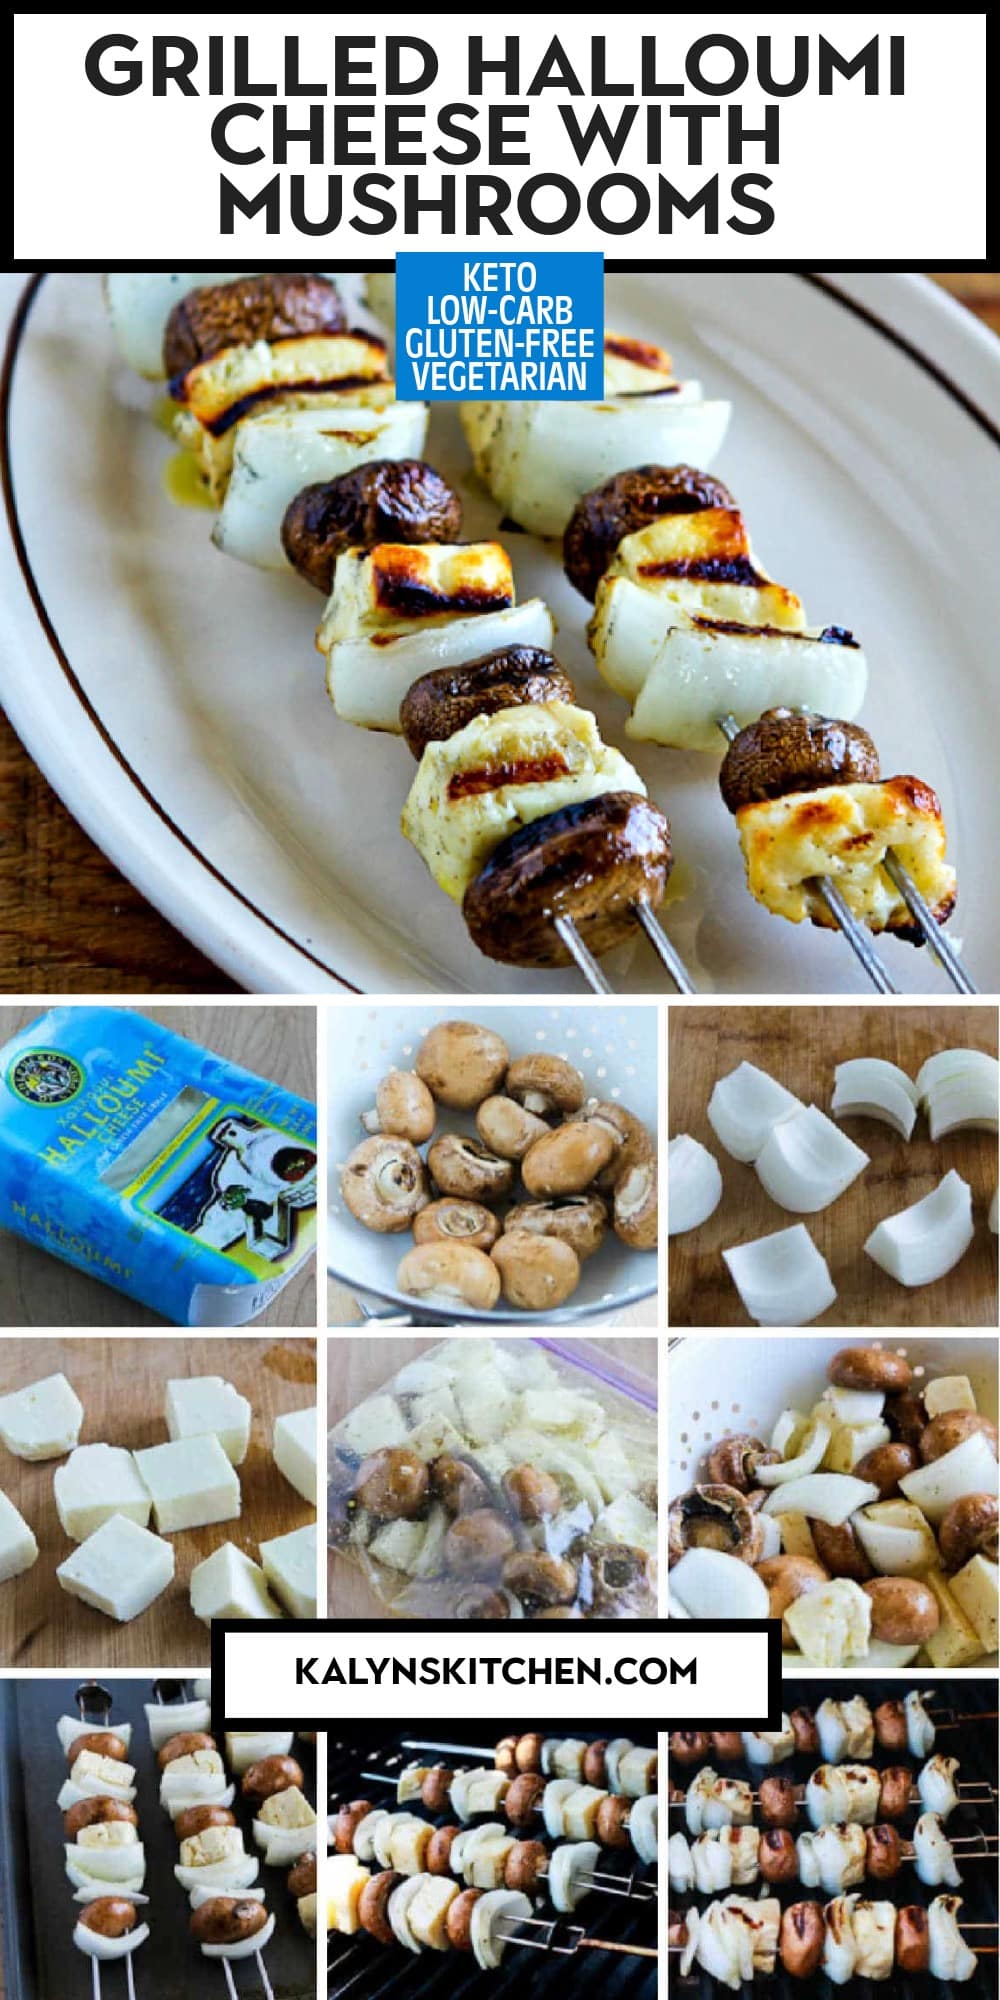 Pinterest image of Grilled Halloumi Cheese with Mushrooms